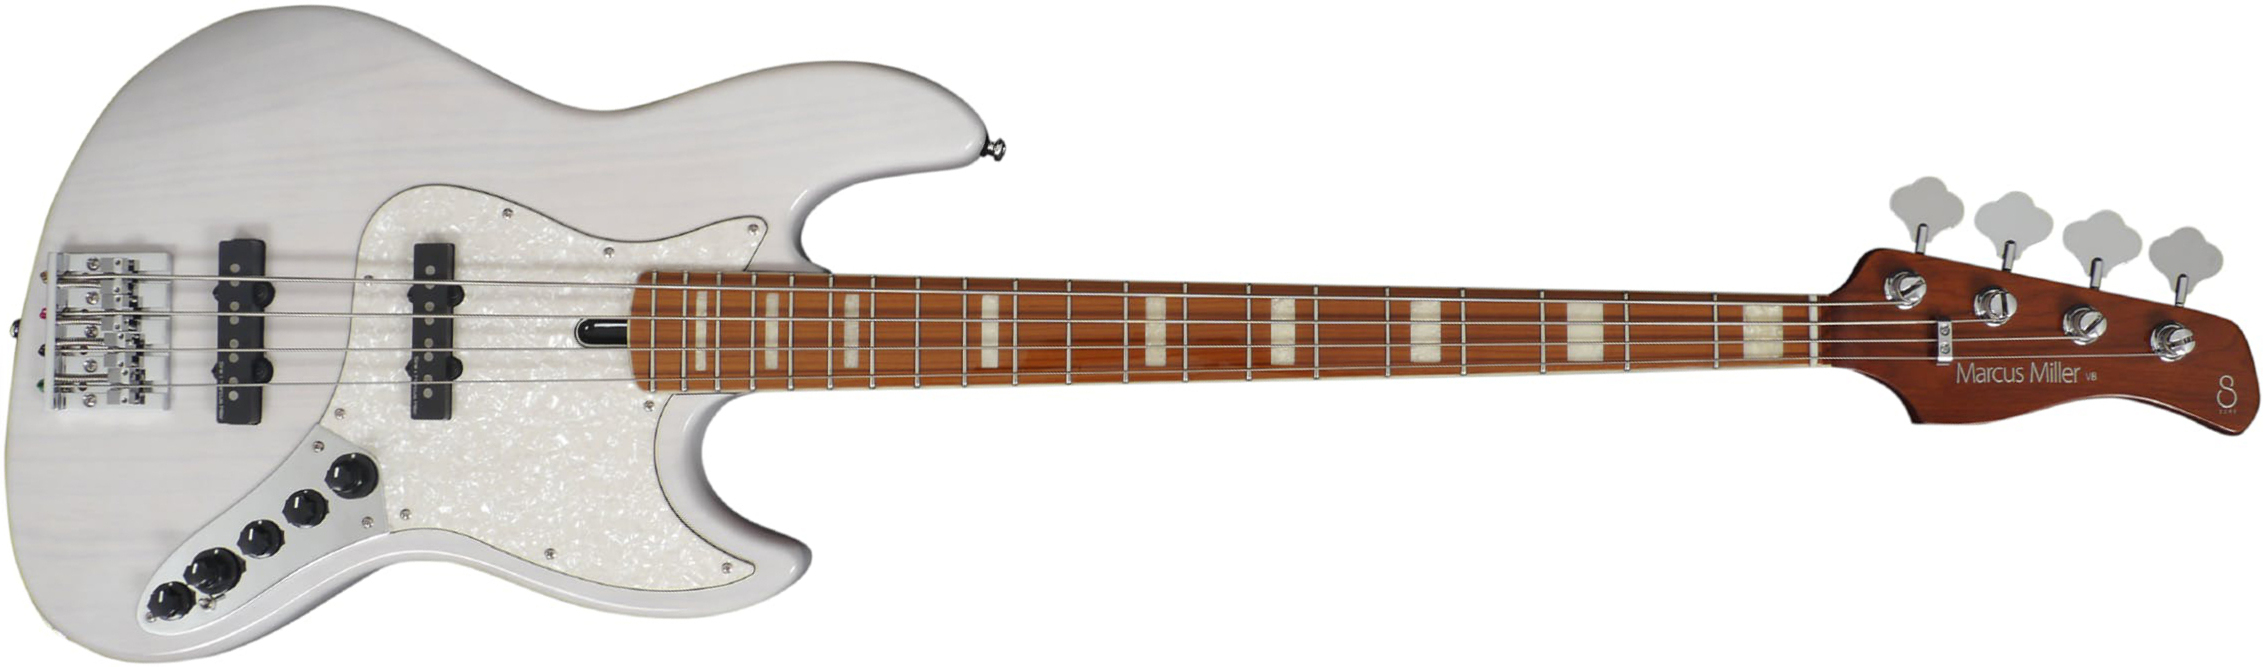 Marcus Miller V8 4st Active Mn - White Blonde - Solid body electric bass - Main picture